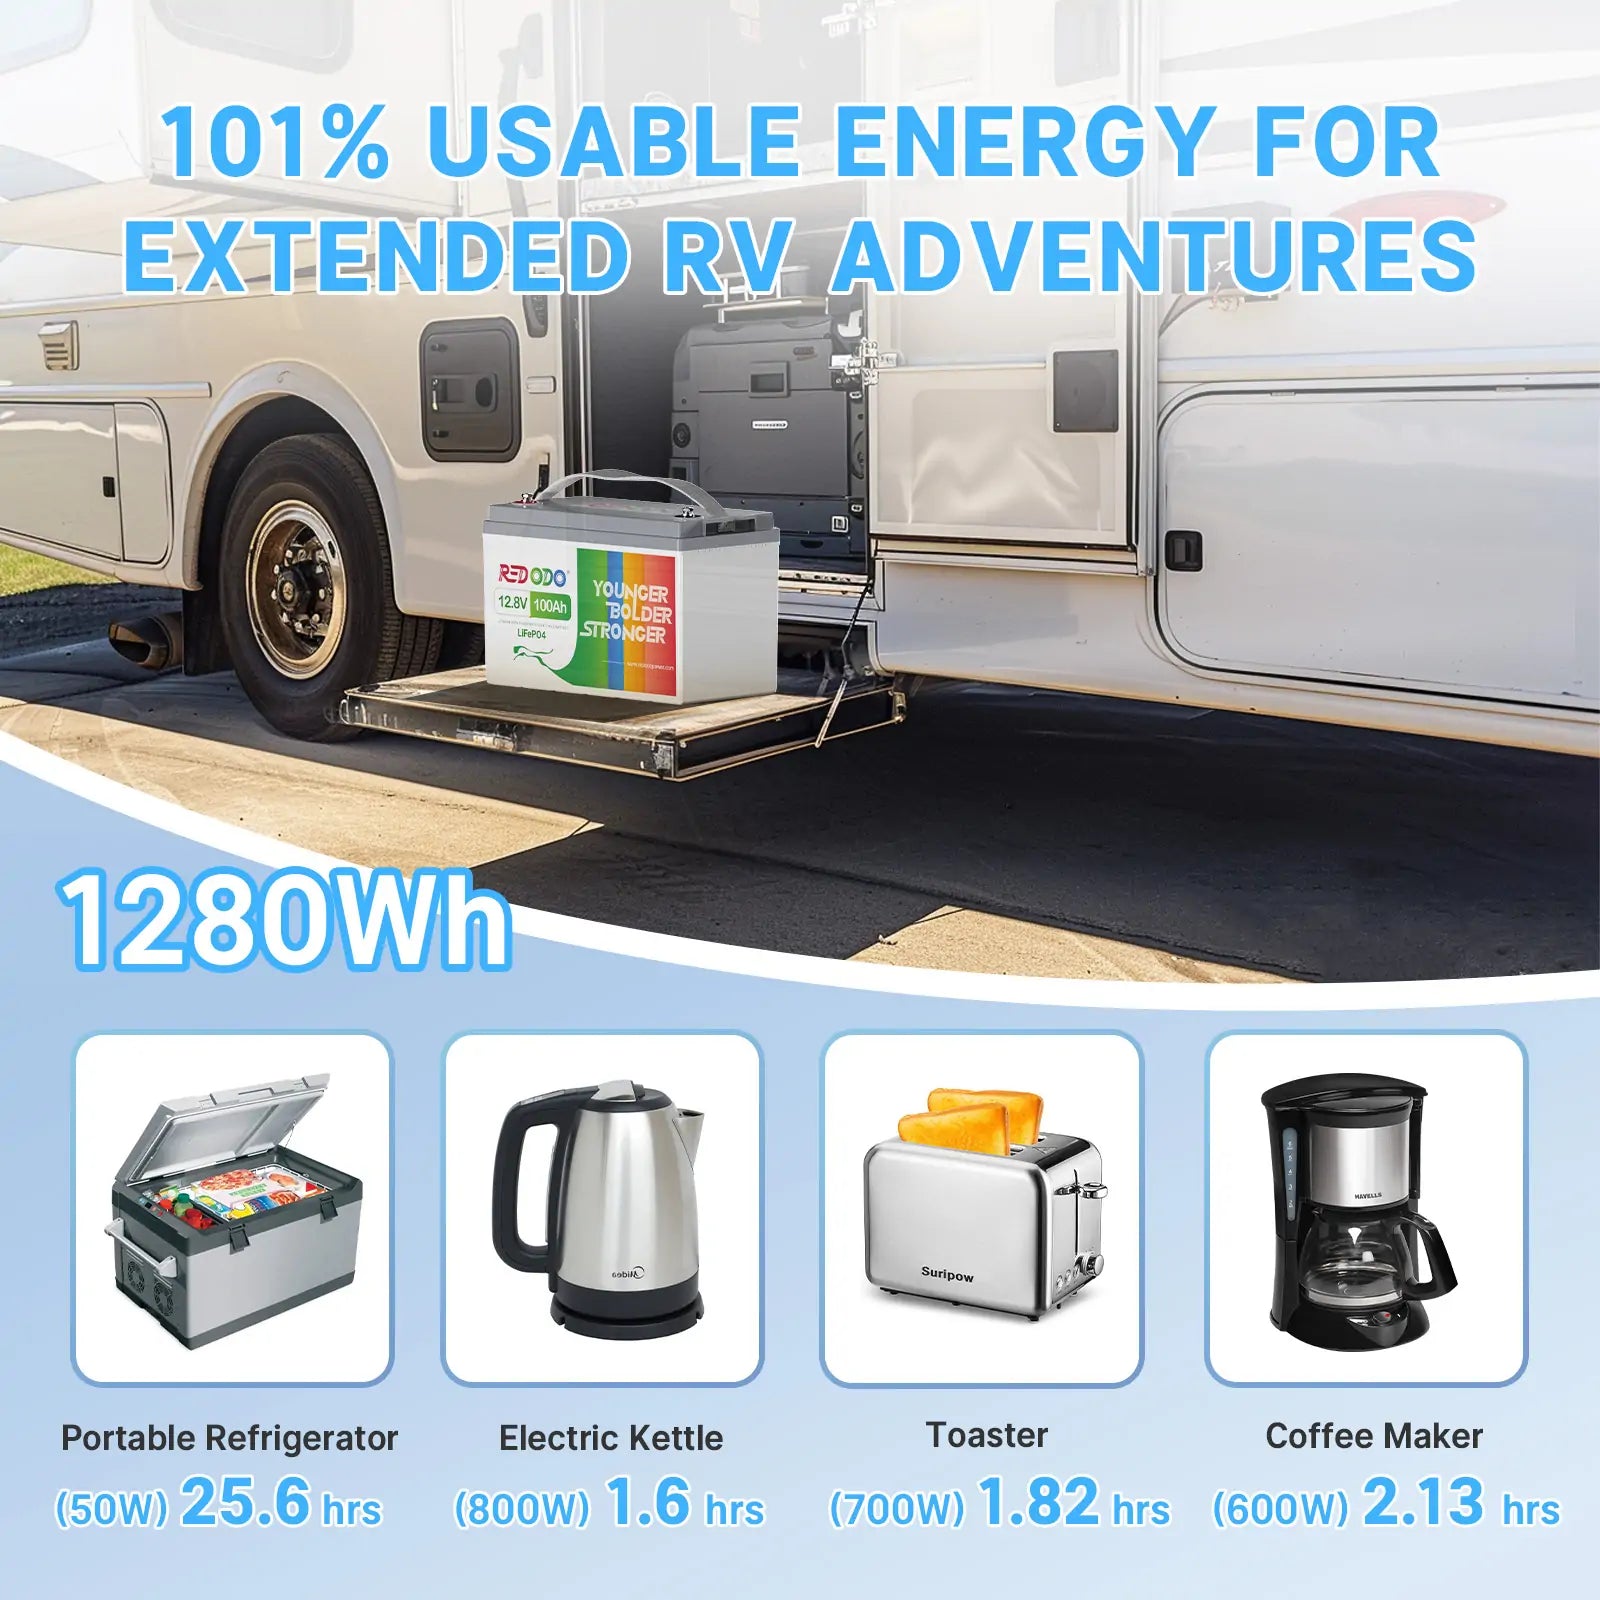 high energy 1280Wh for extended rv adventures